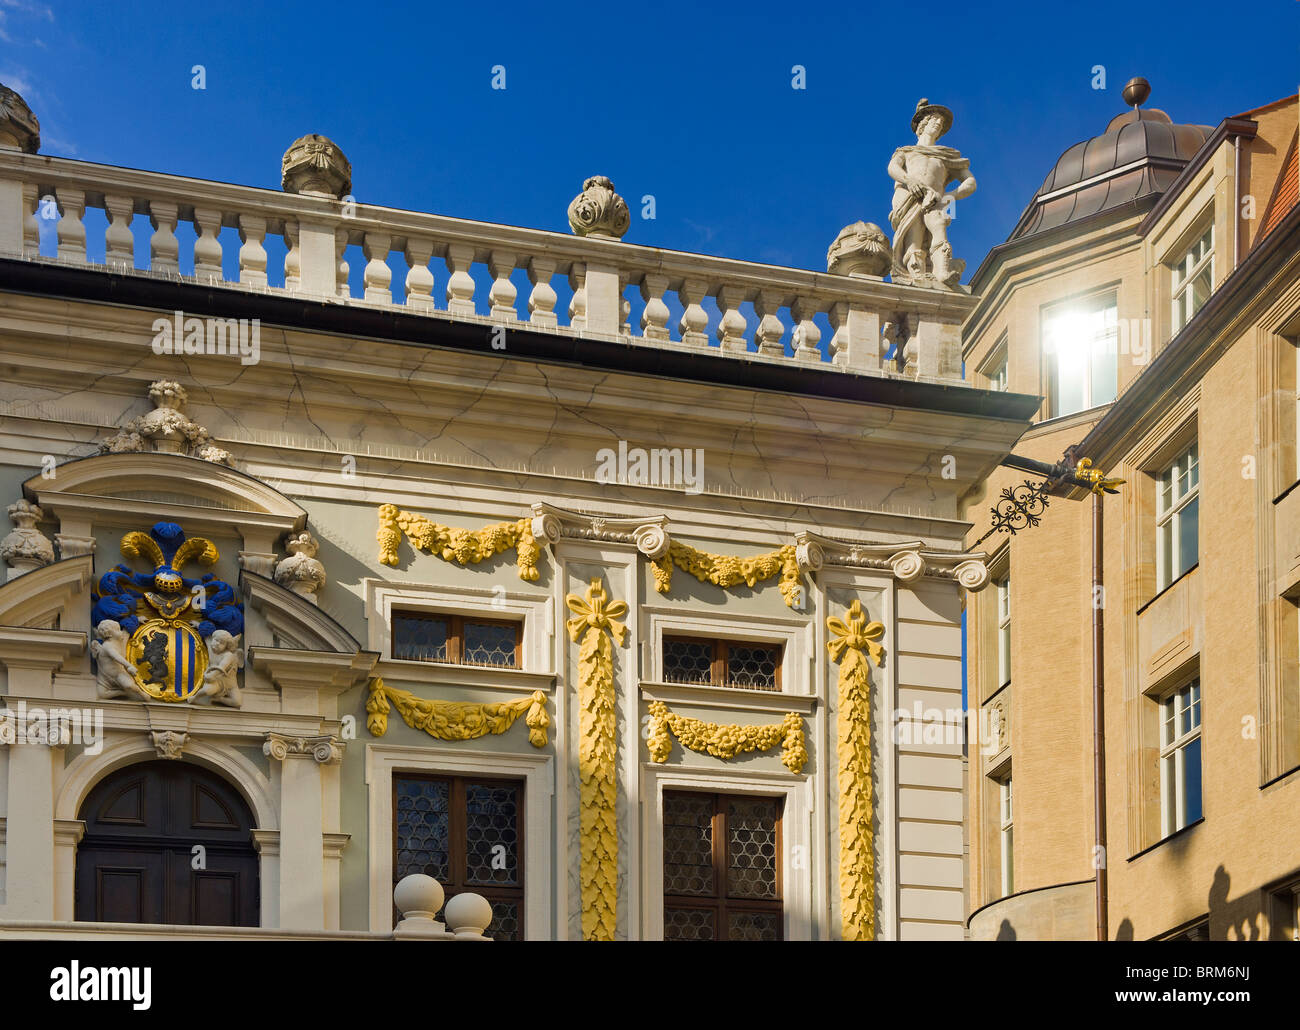 leipzig germany The old stock exchange building die alte Börse trade trading market house building blue sky bright light rich Stock Photo